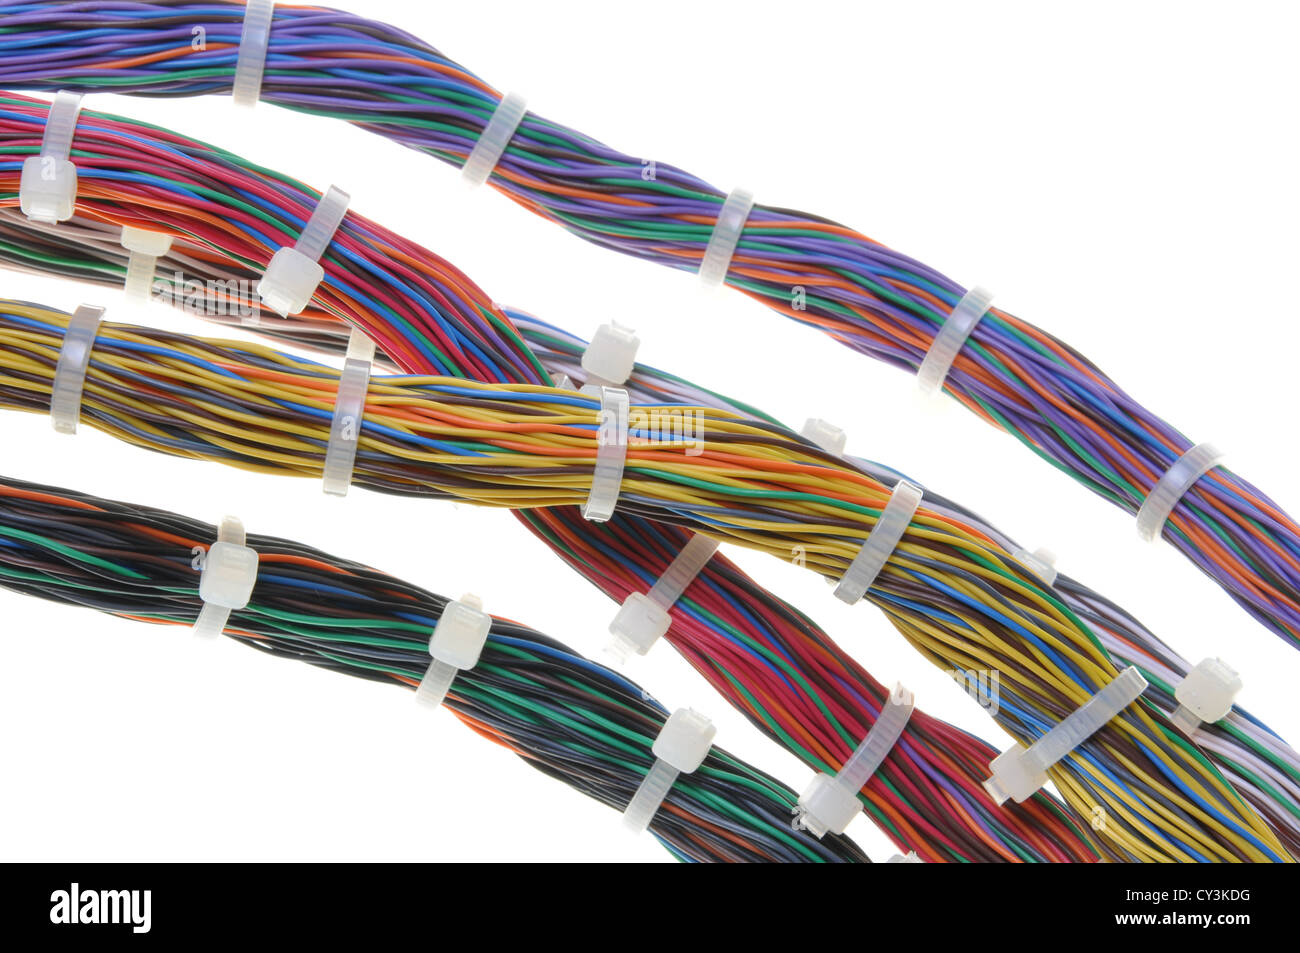 Bundles of network cables with cable ties Stock Photo - Alamy